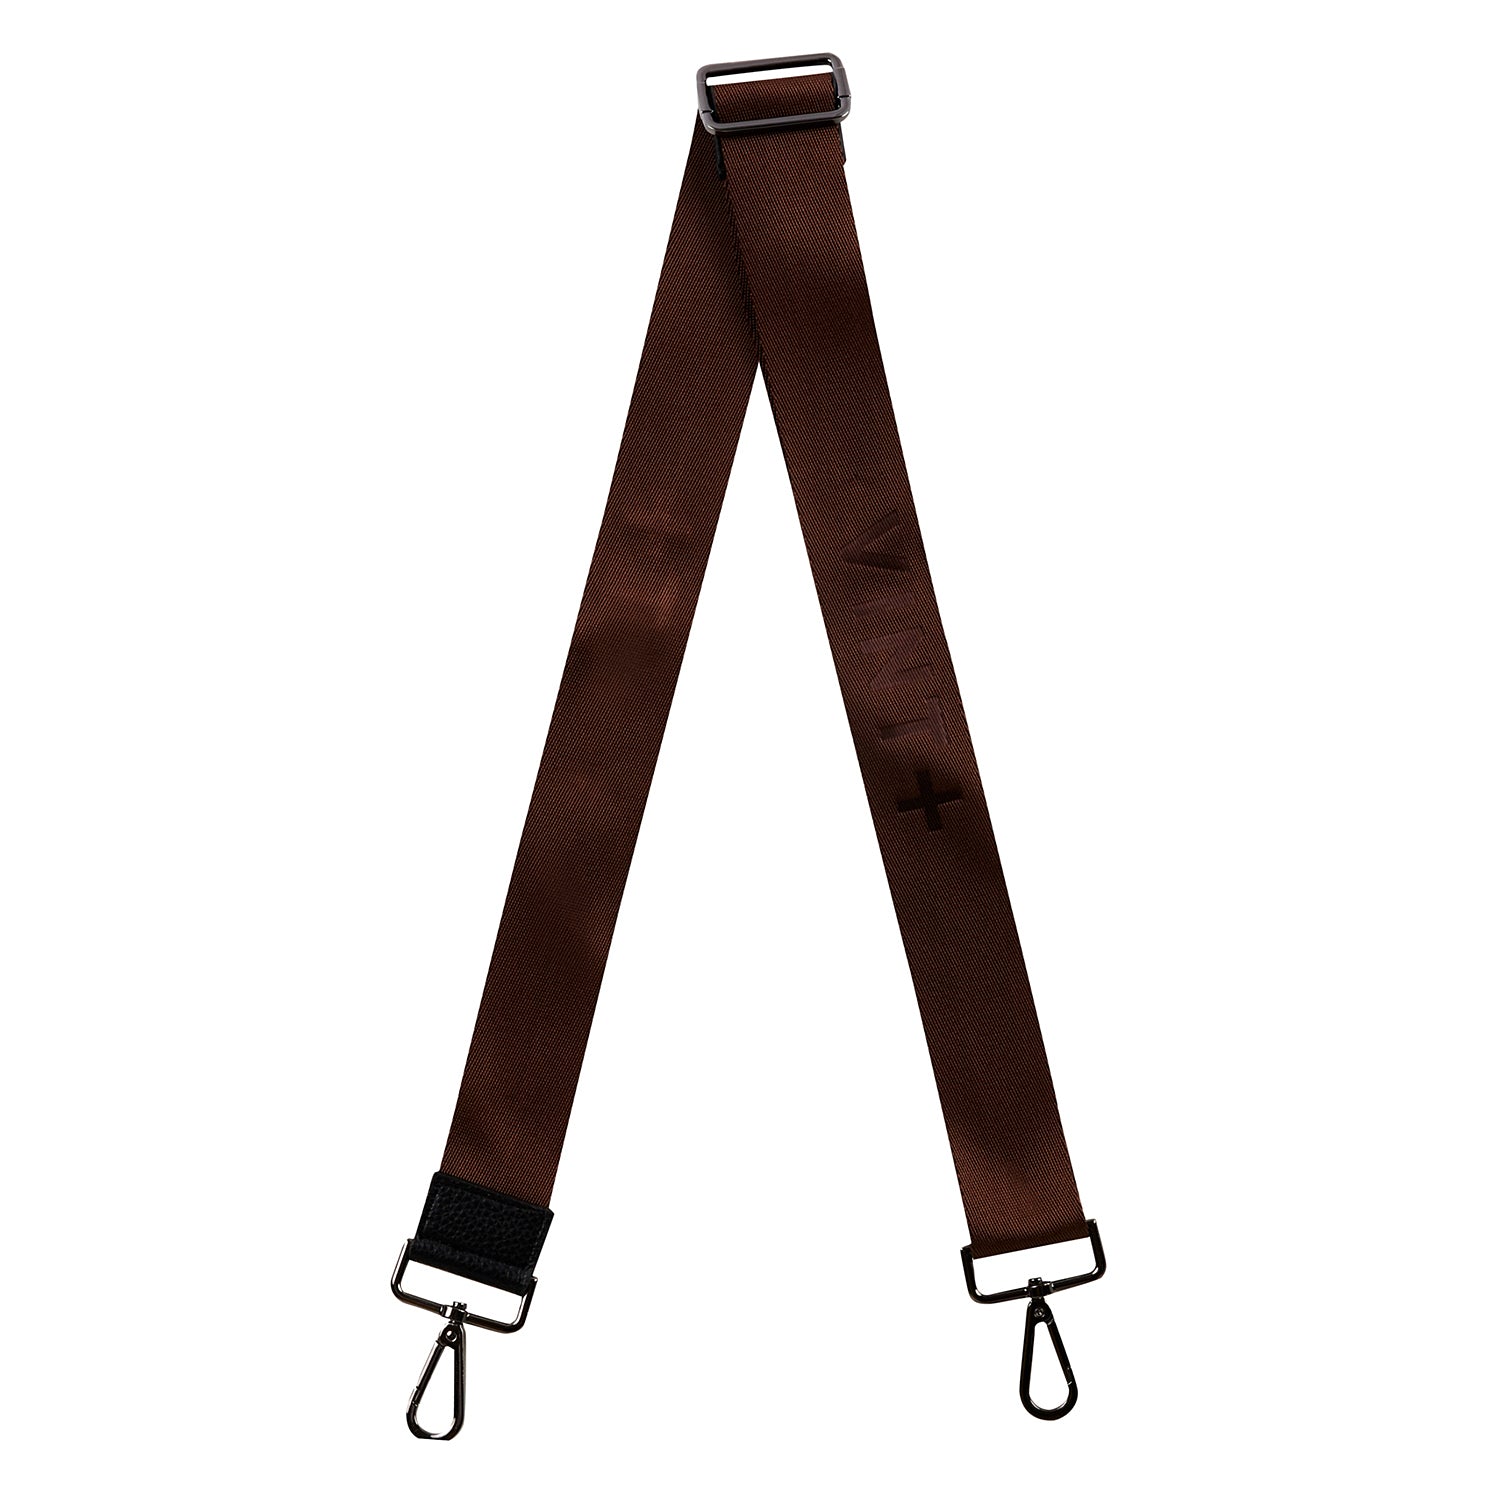 CARRY STRAP - BROWN